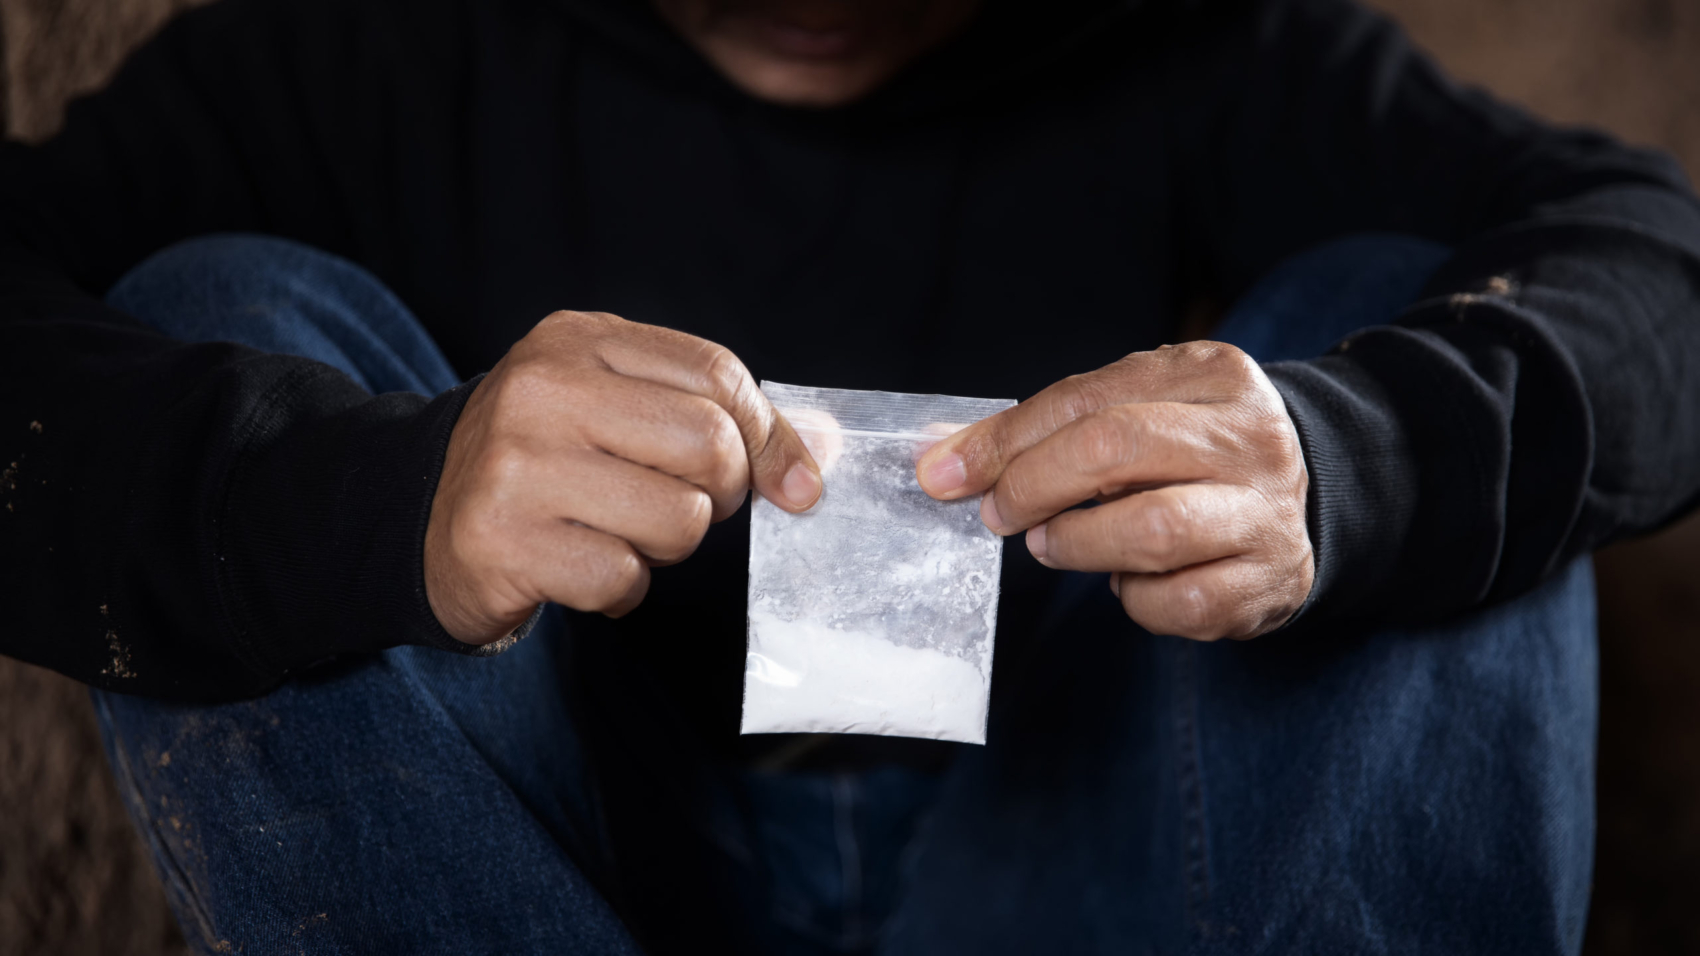 What Are the Symptoms of Cocaine Abuse?